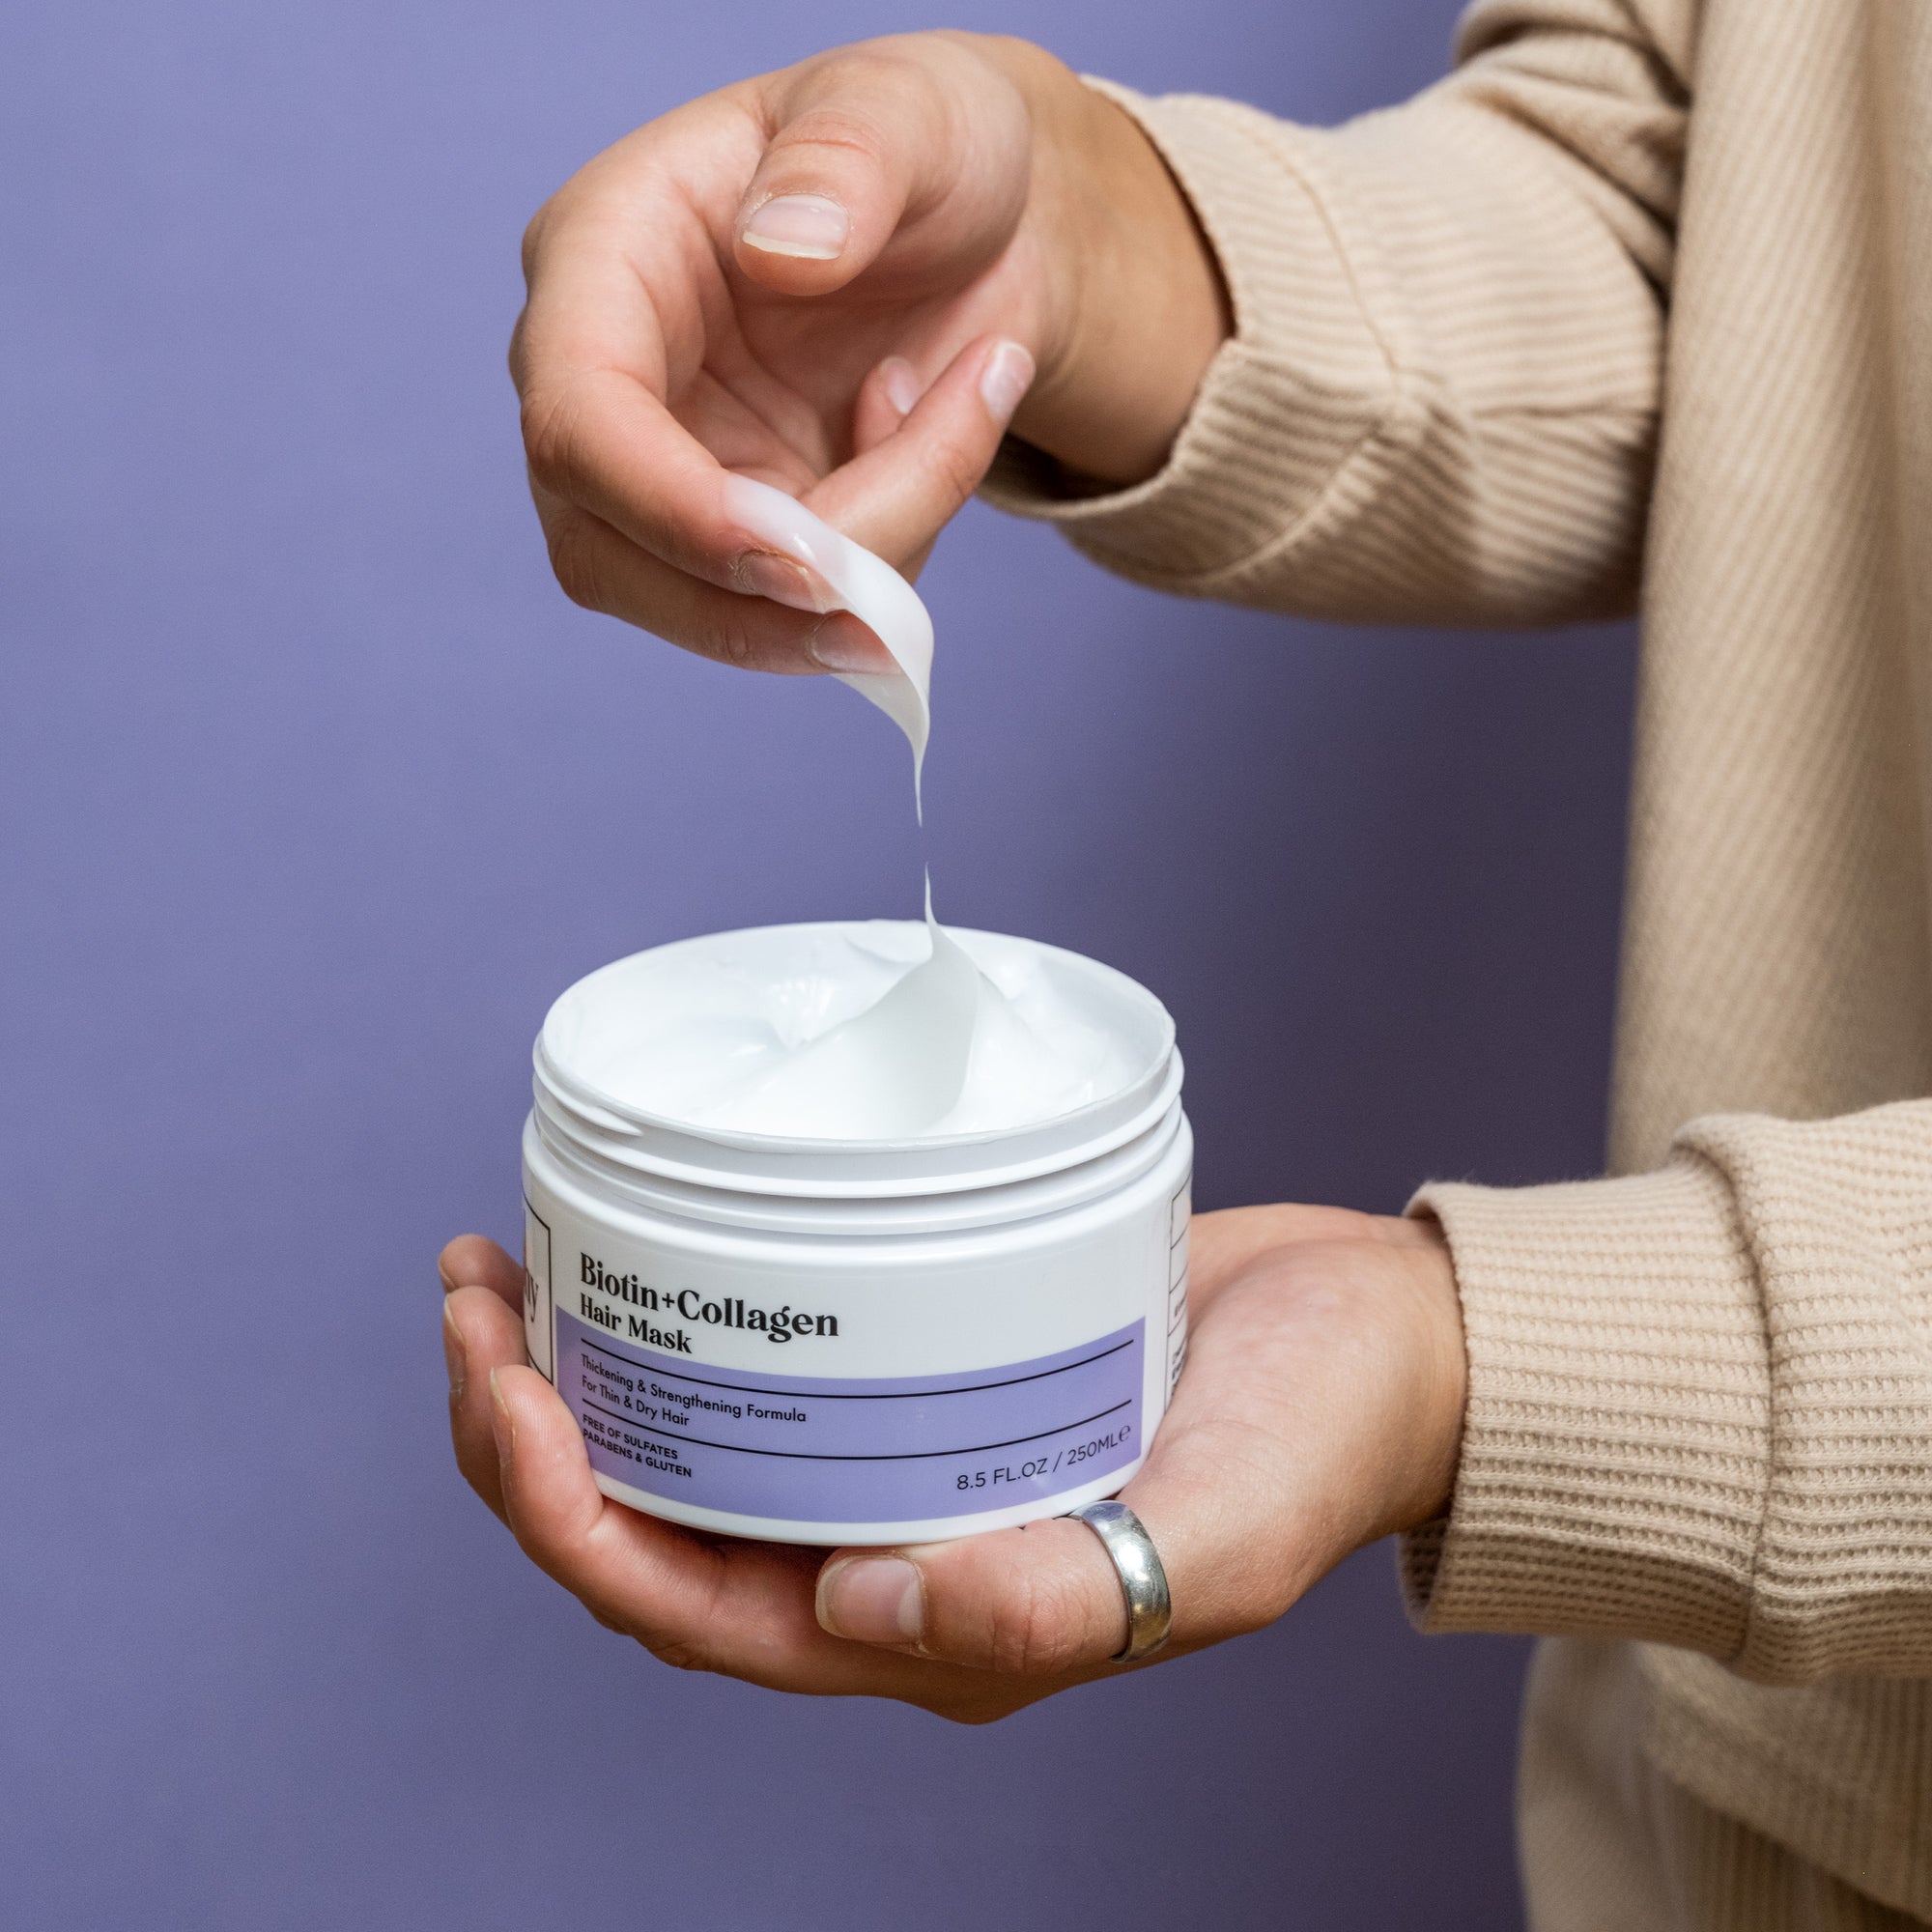 Biotin + Collagen Hair Mask jar held in hand while woman dips hand into cream